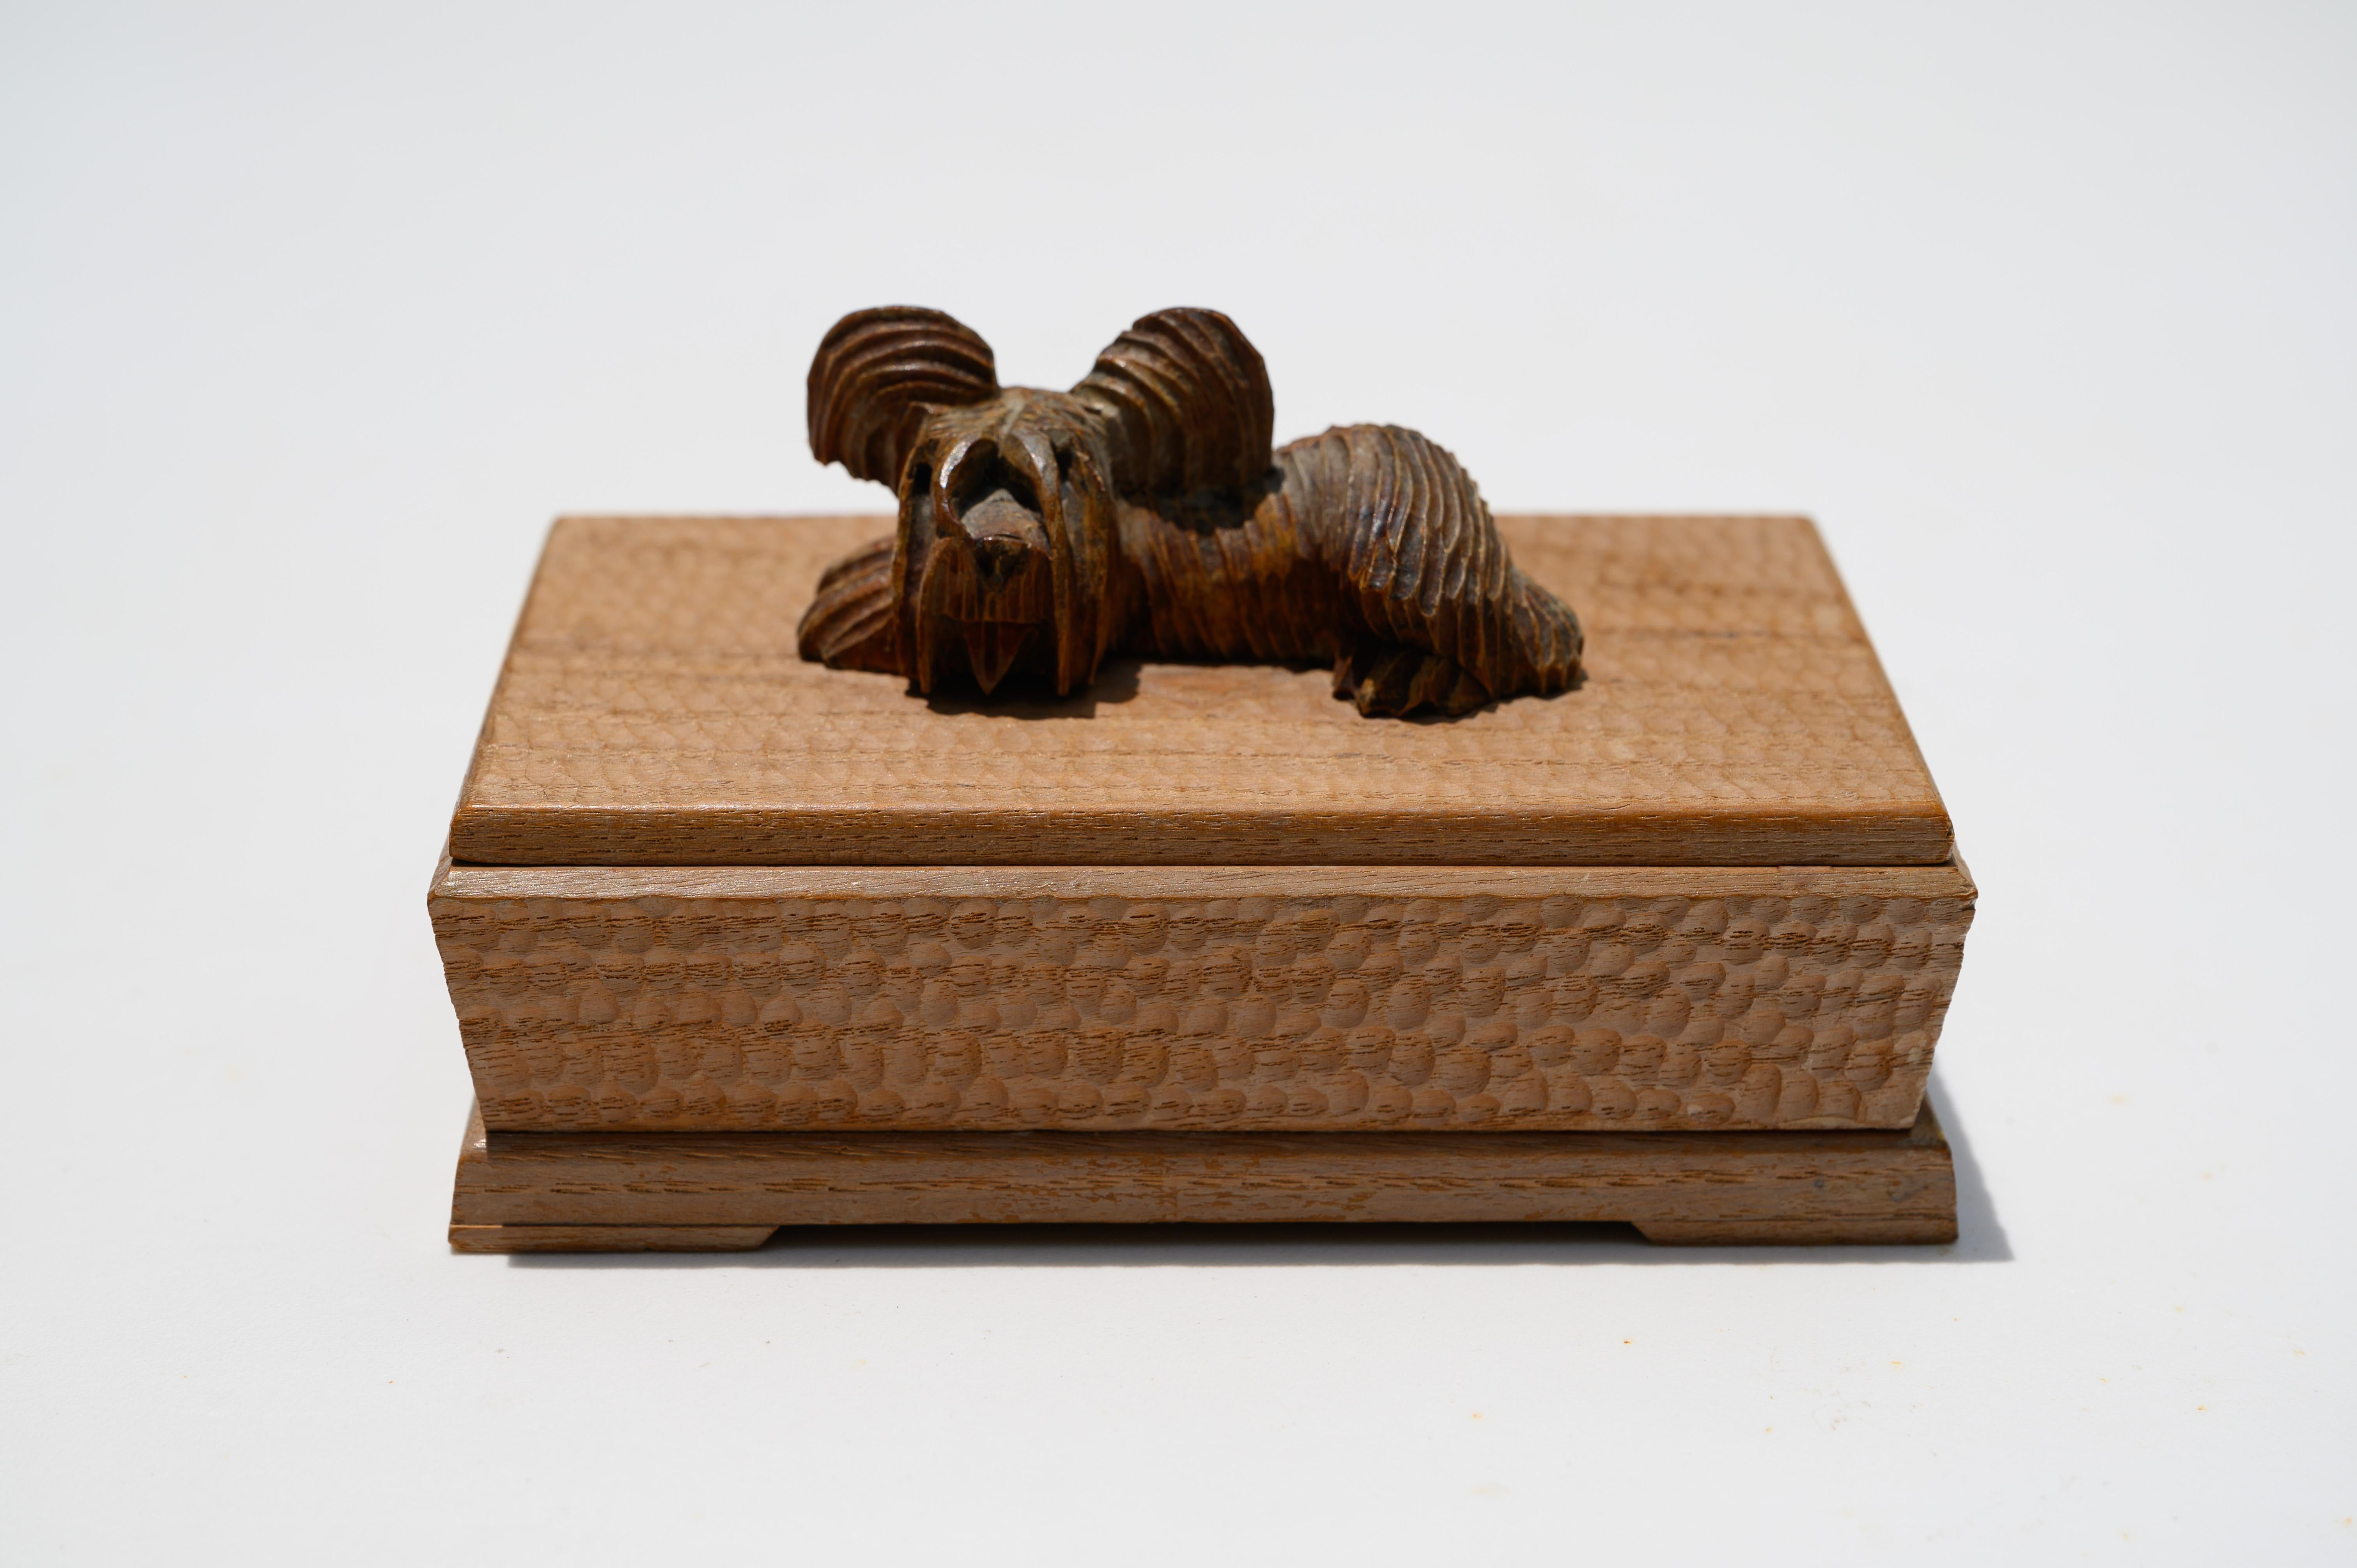 Hand-Carved Decorative Wooden Keepsake Box with Animal Sculpture Lidded Top In Good Condition For Sale In Miami, FL